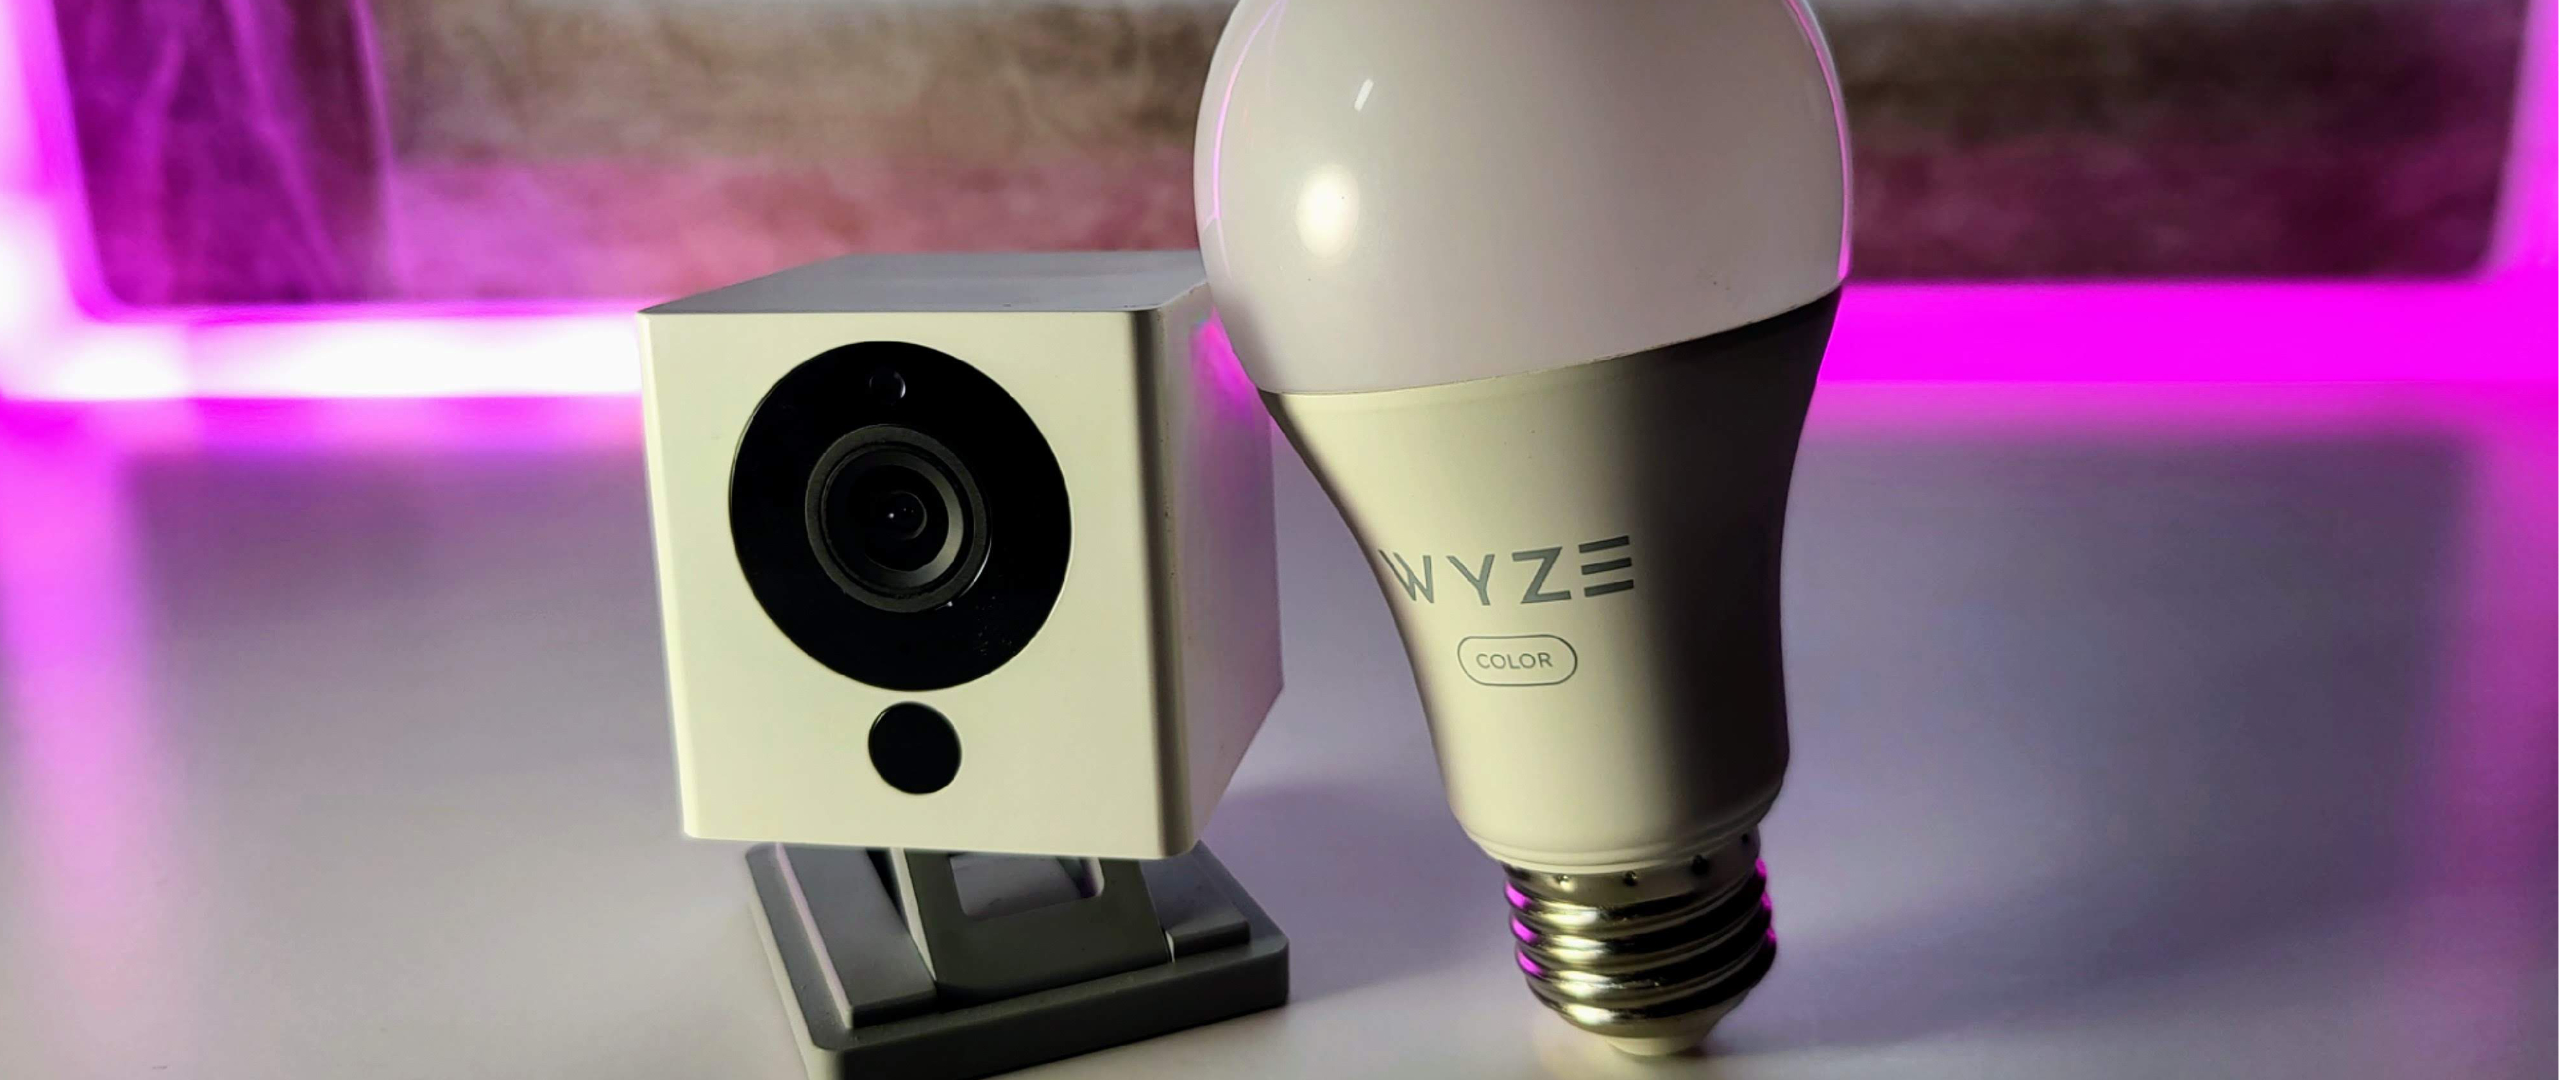 Are Wyze products safe? Android Central